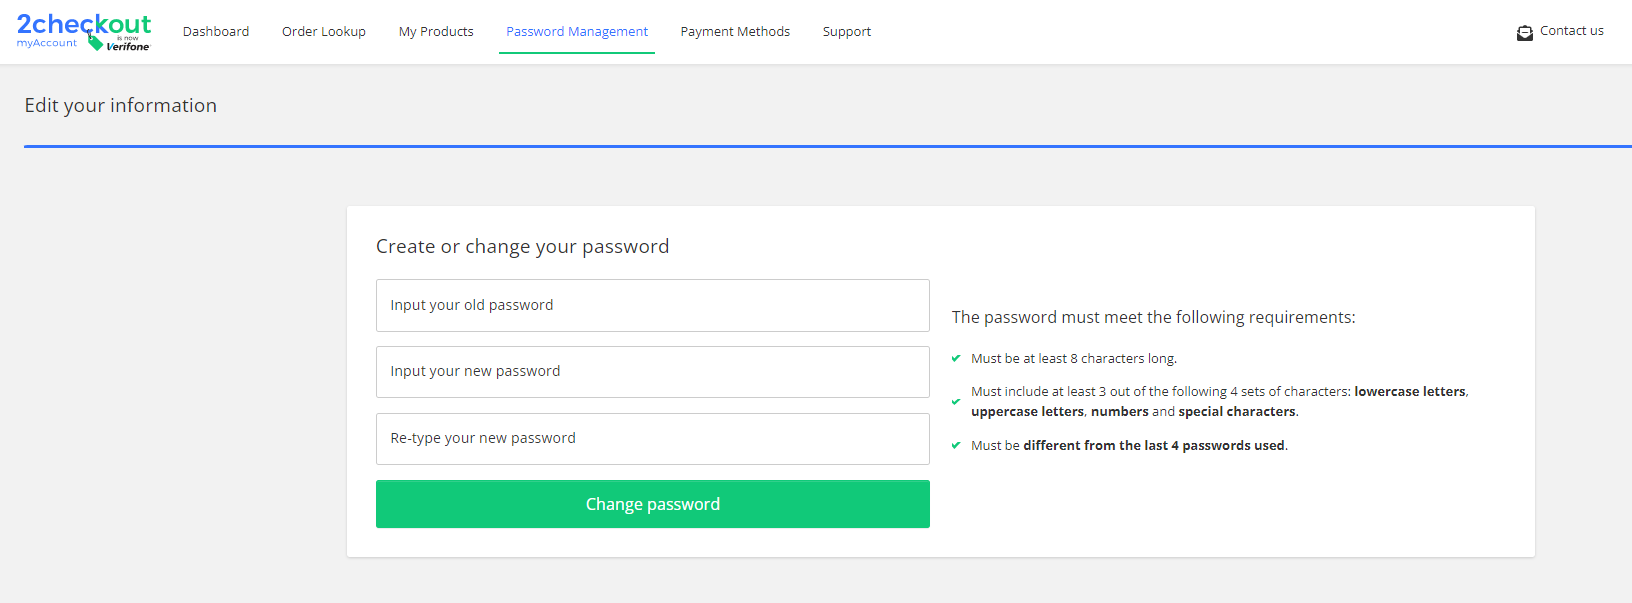 change password in 2Checkout myAccount